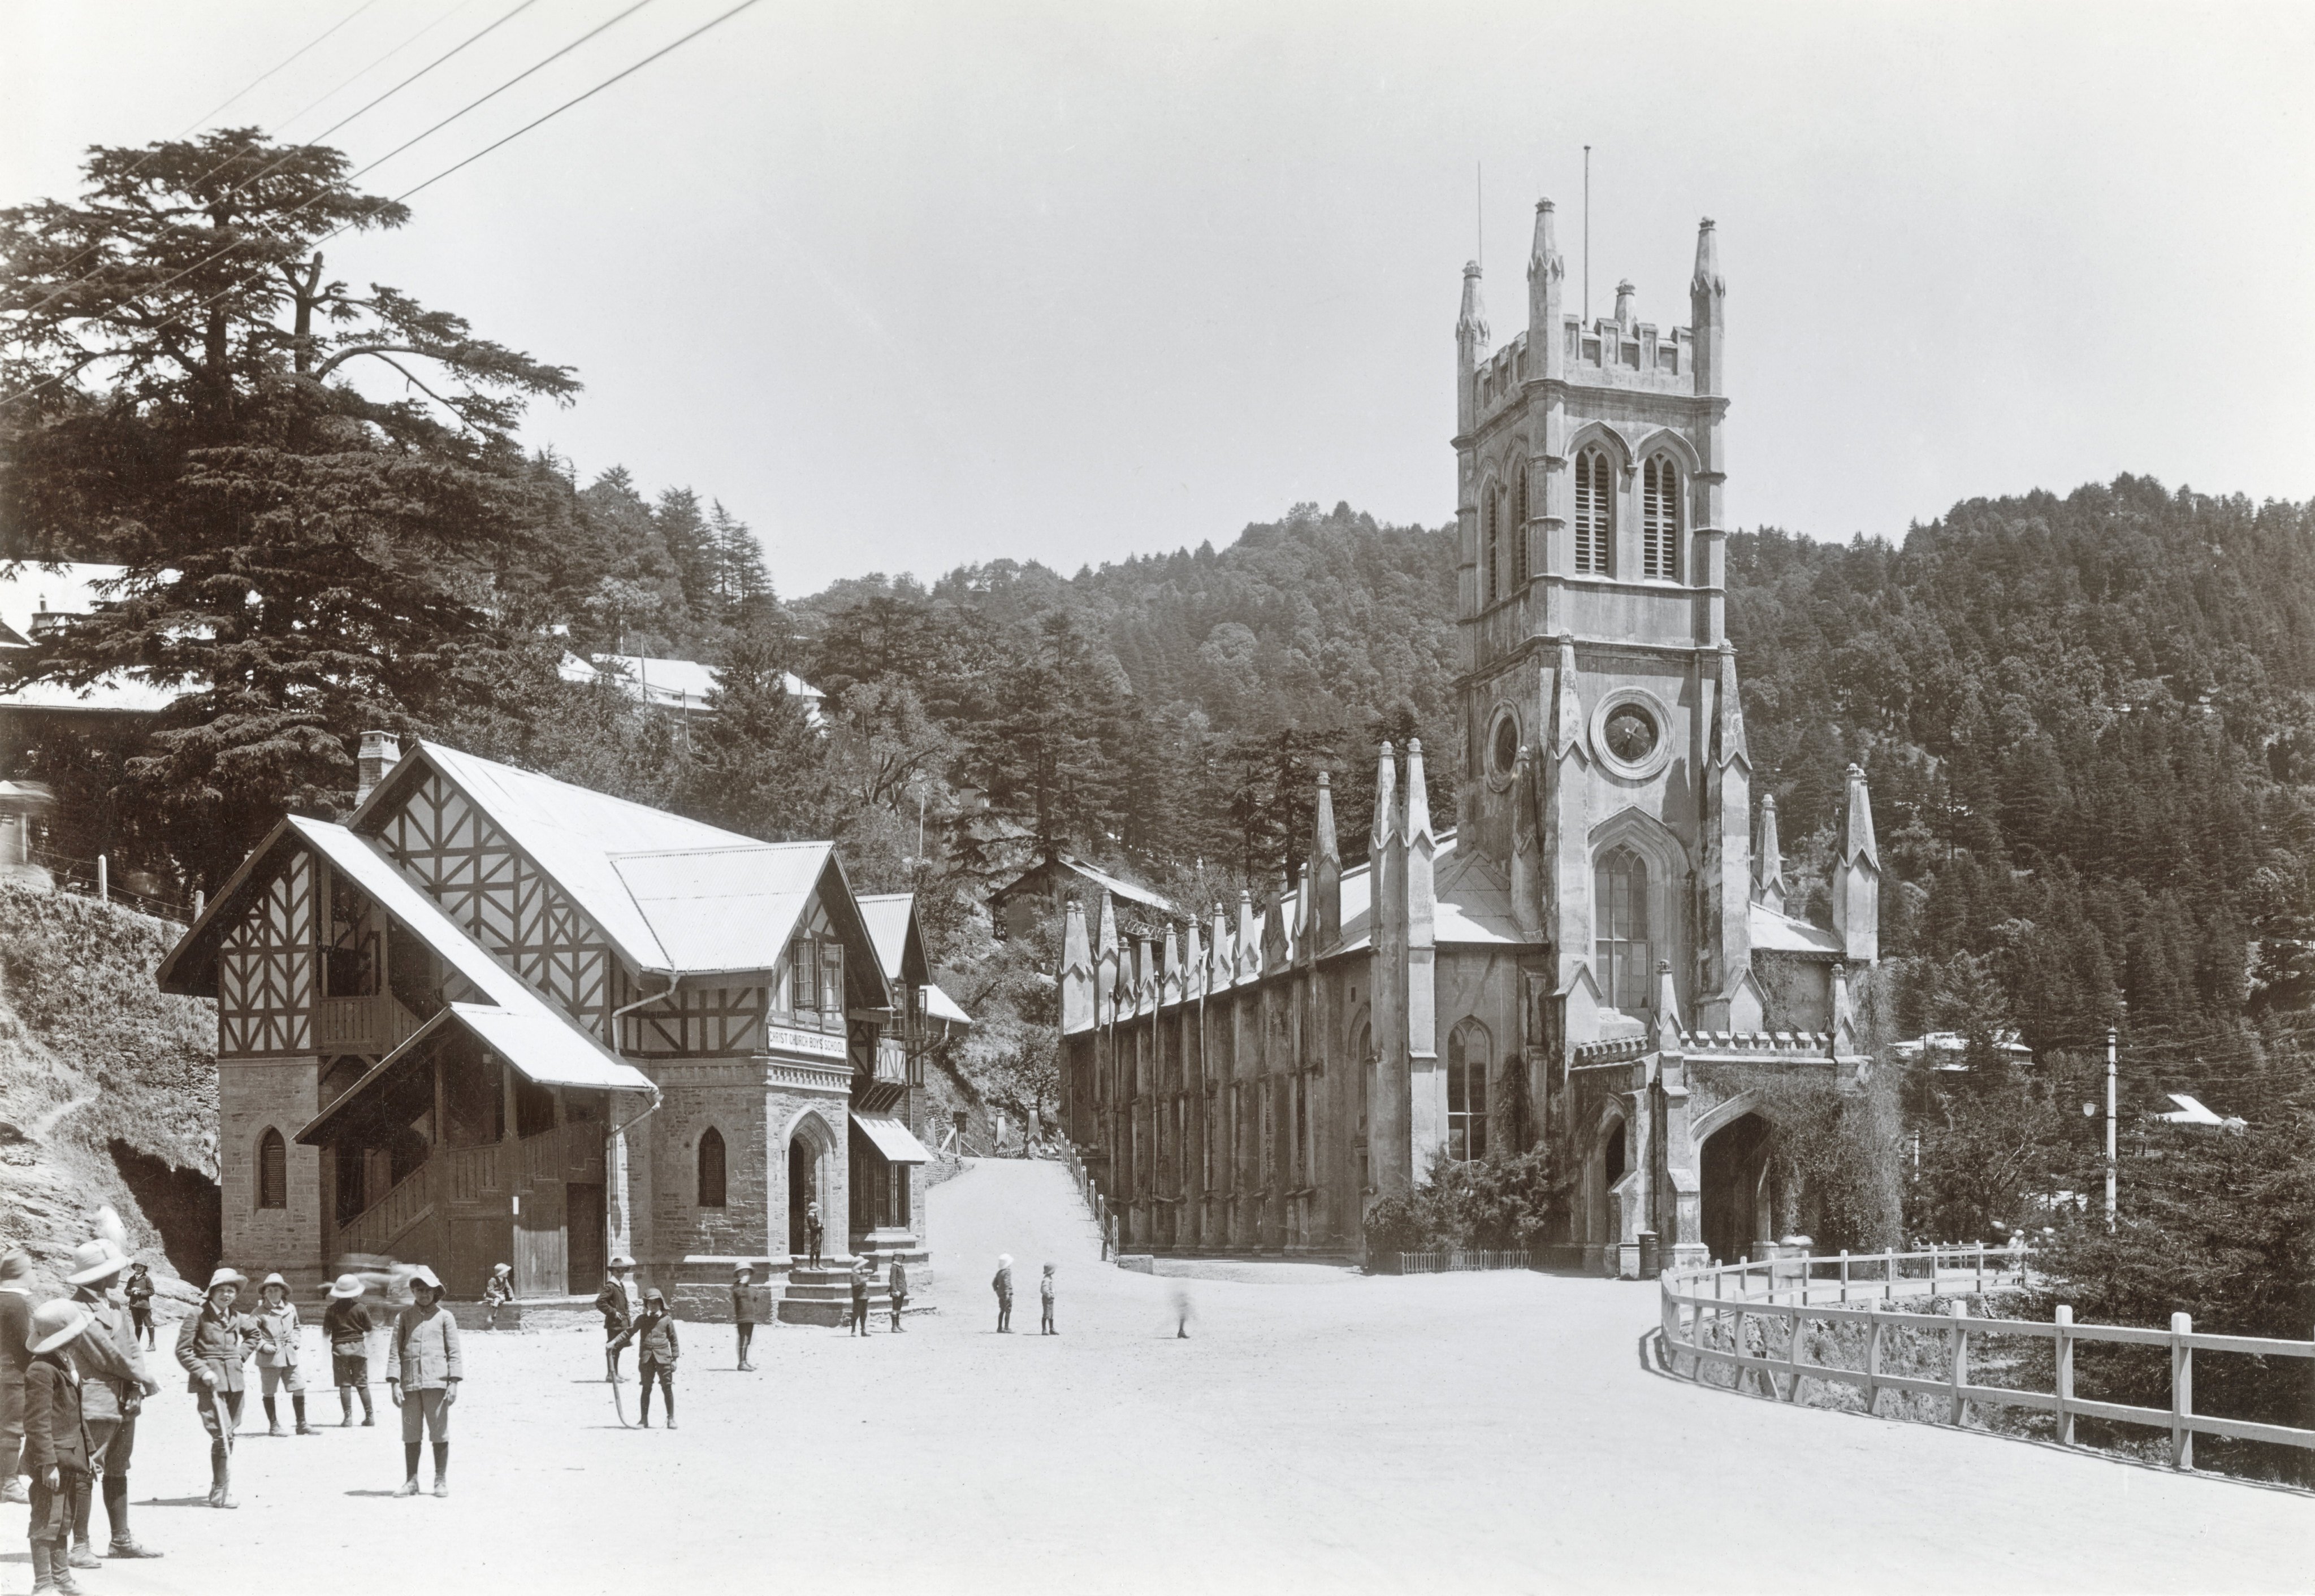 The British hill station in Simla, India, circa 1880. Photo: Getty Images